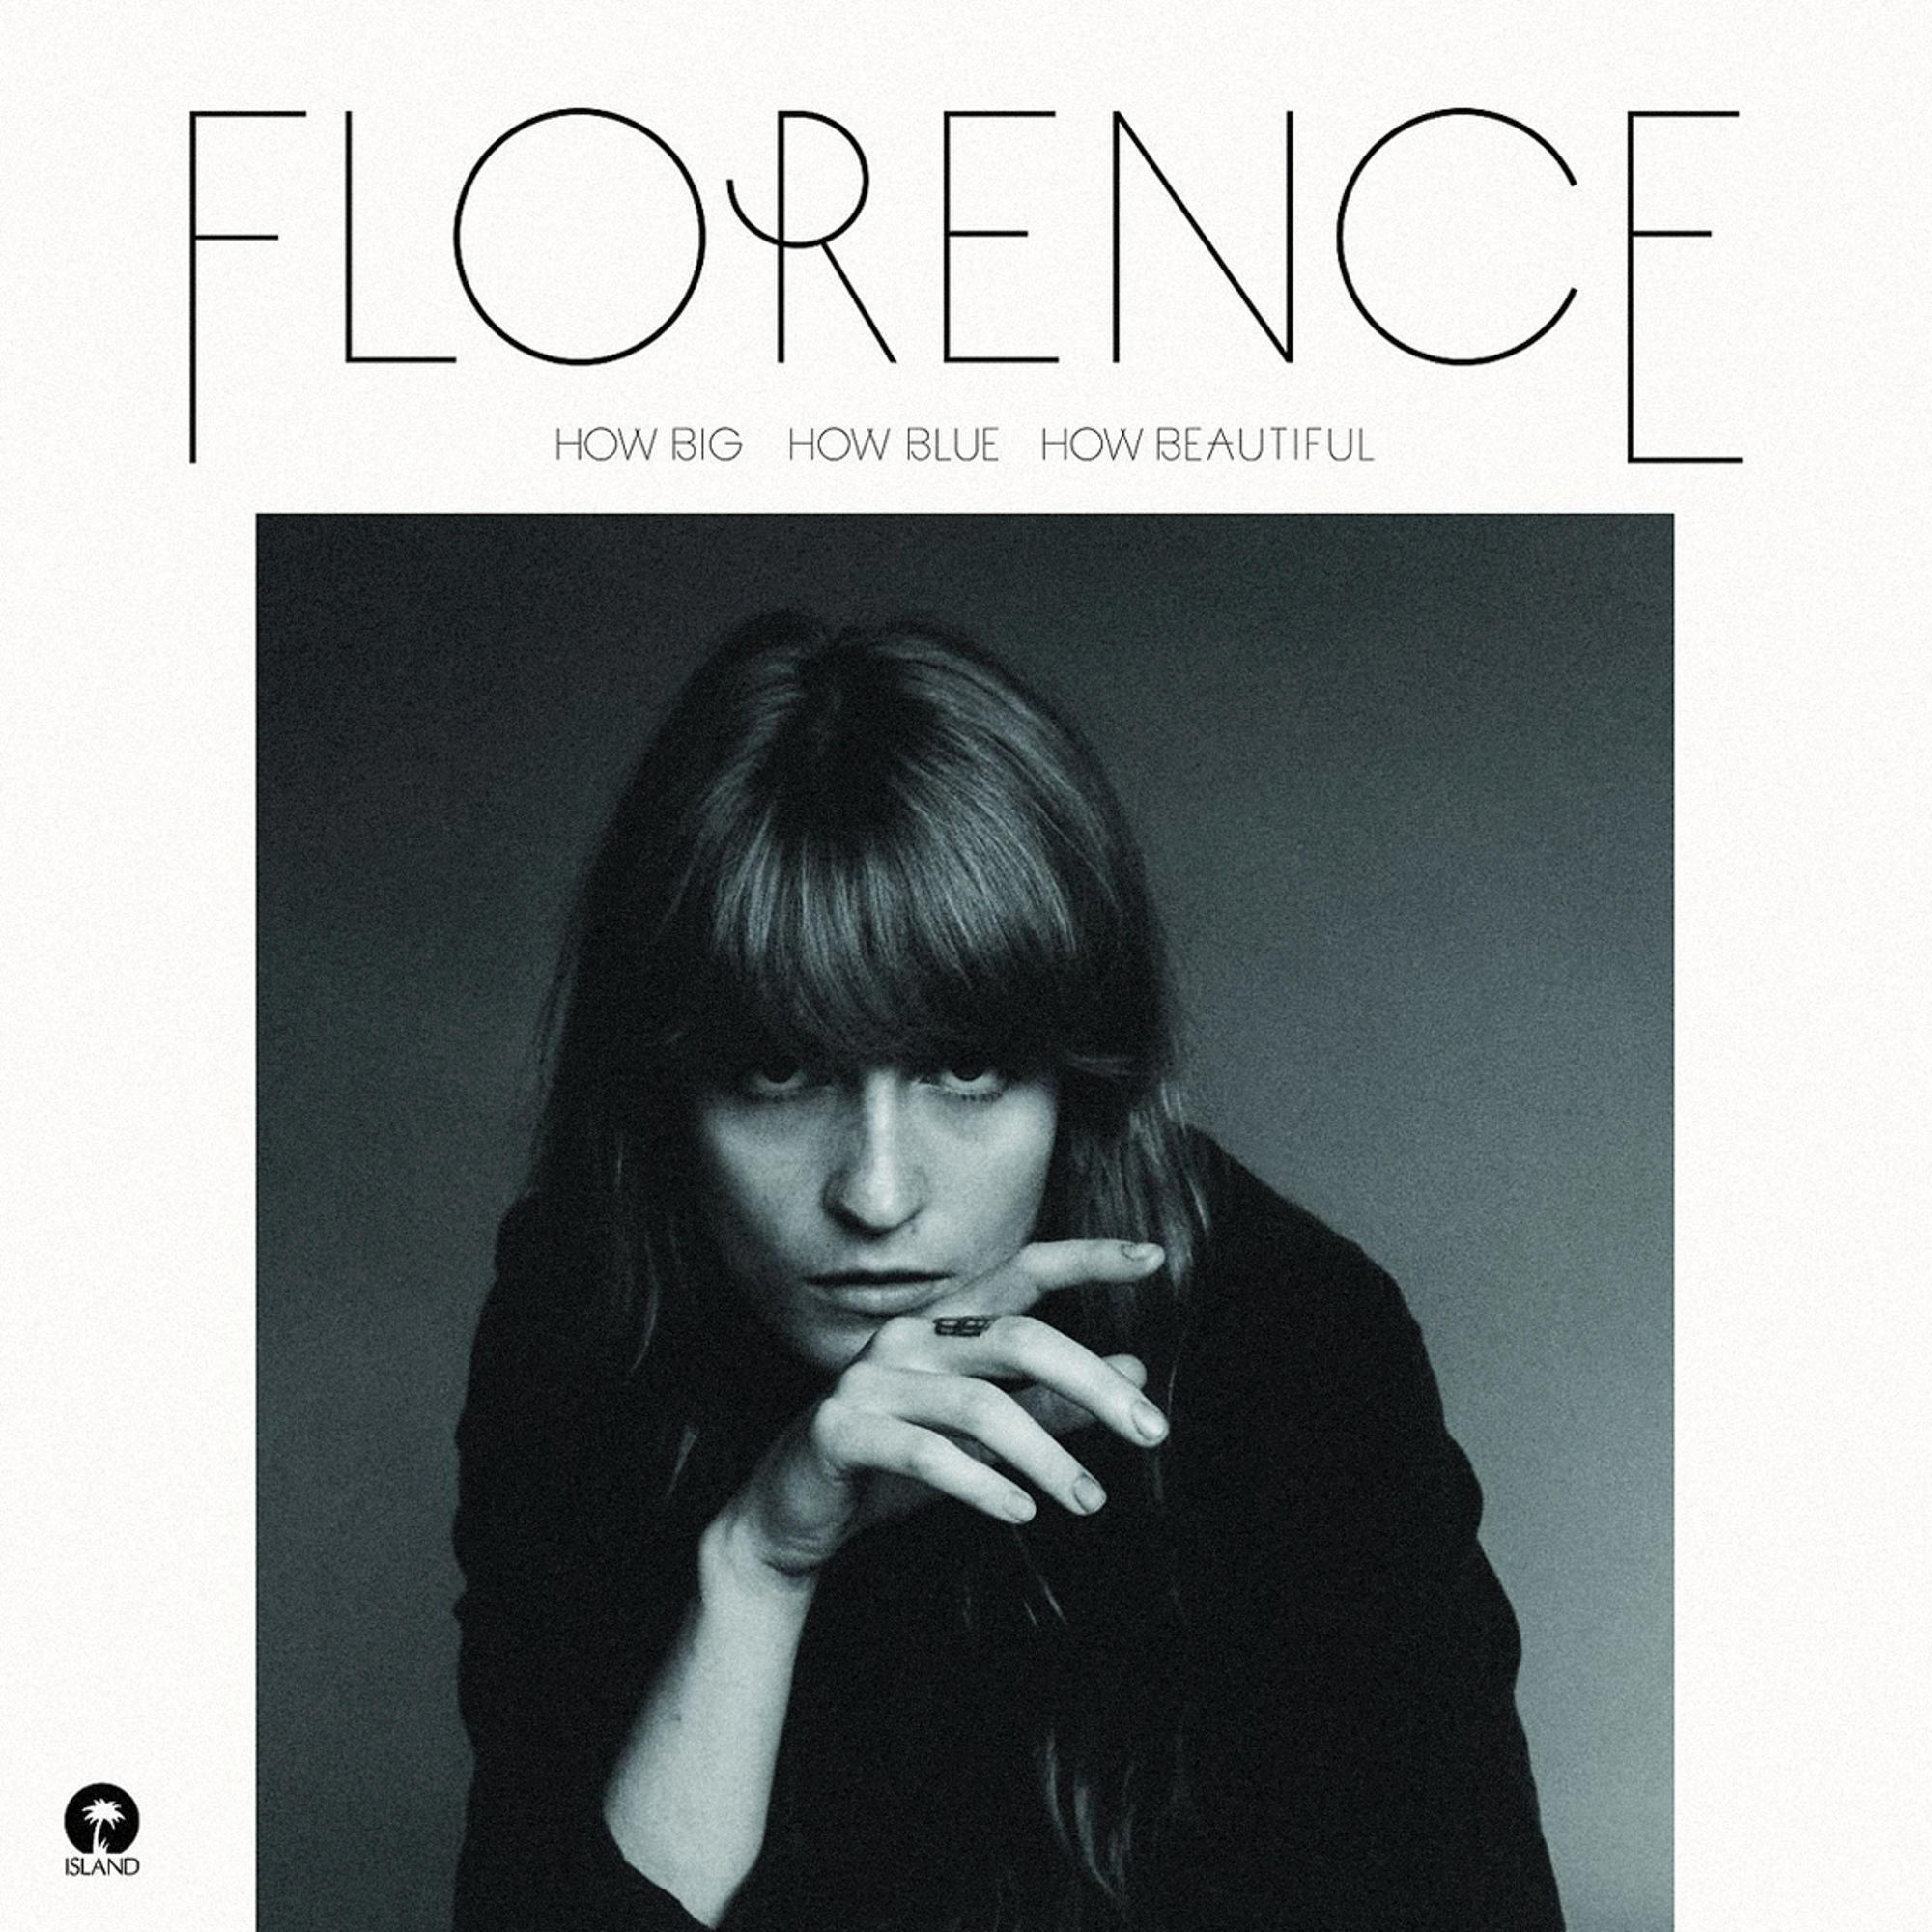 (2lp) + Machine Florence - How Blue, - The Big, (Vinyl) Beautiful How How